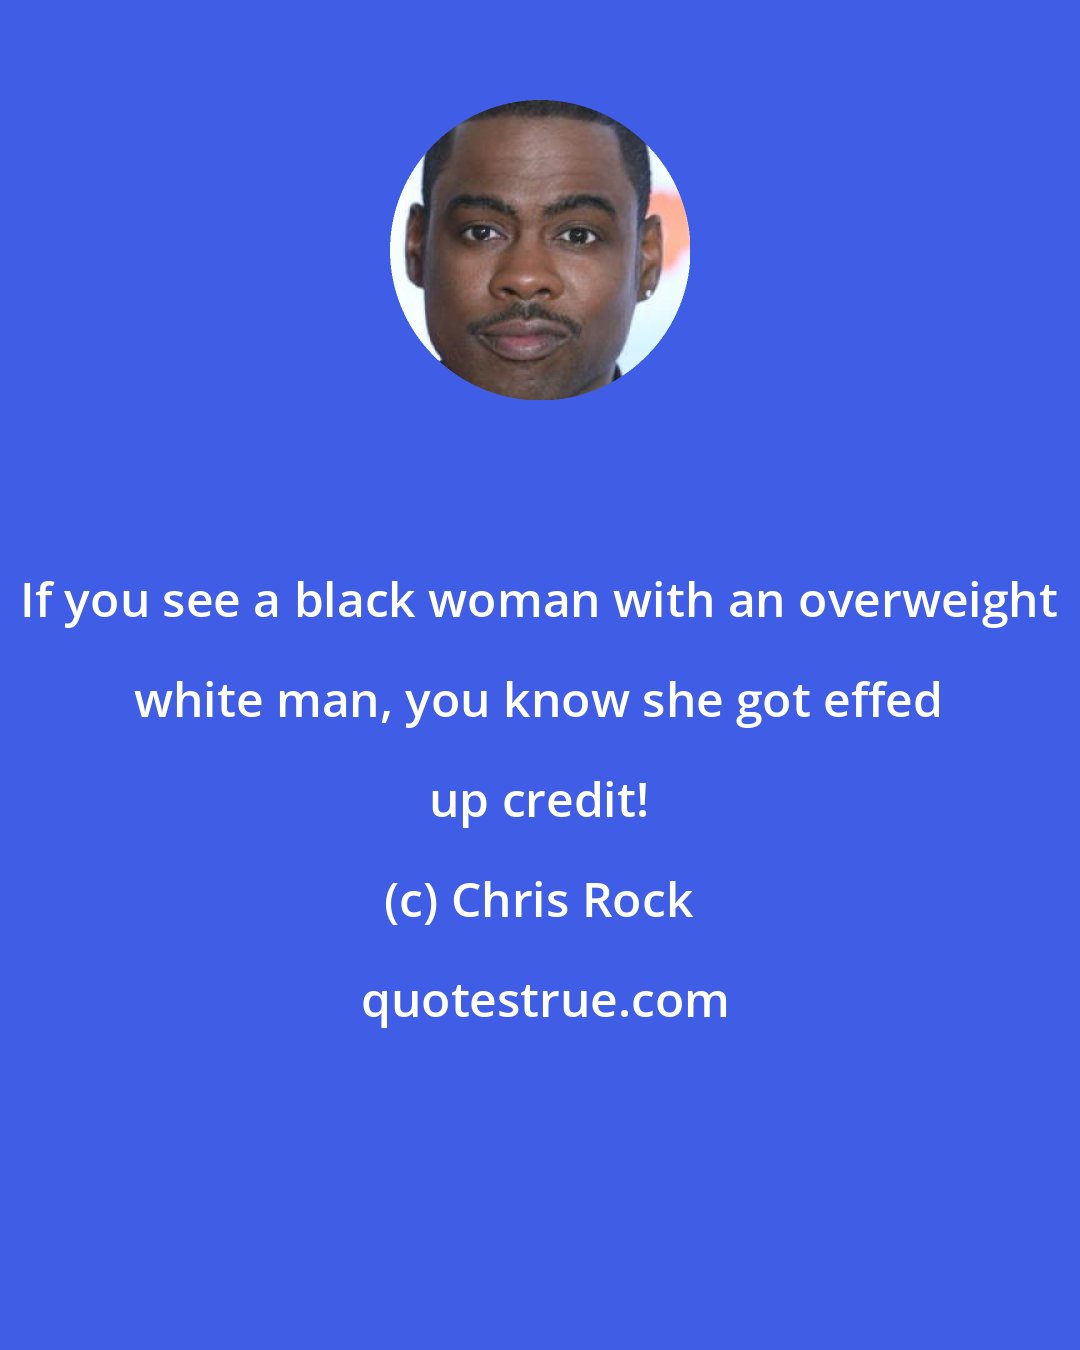 Chris Rock: If you see a black woman with an overweight white man, you know she got effed up credit!